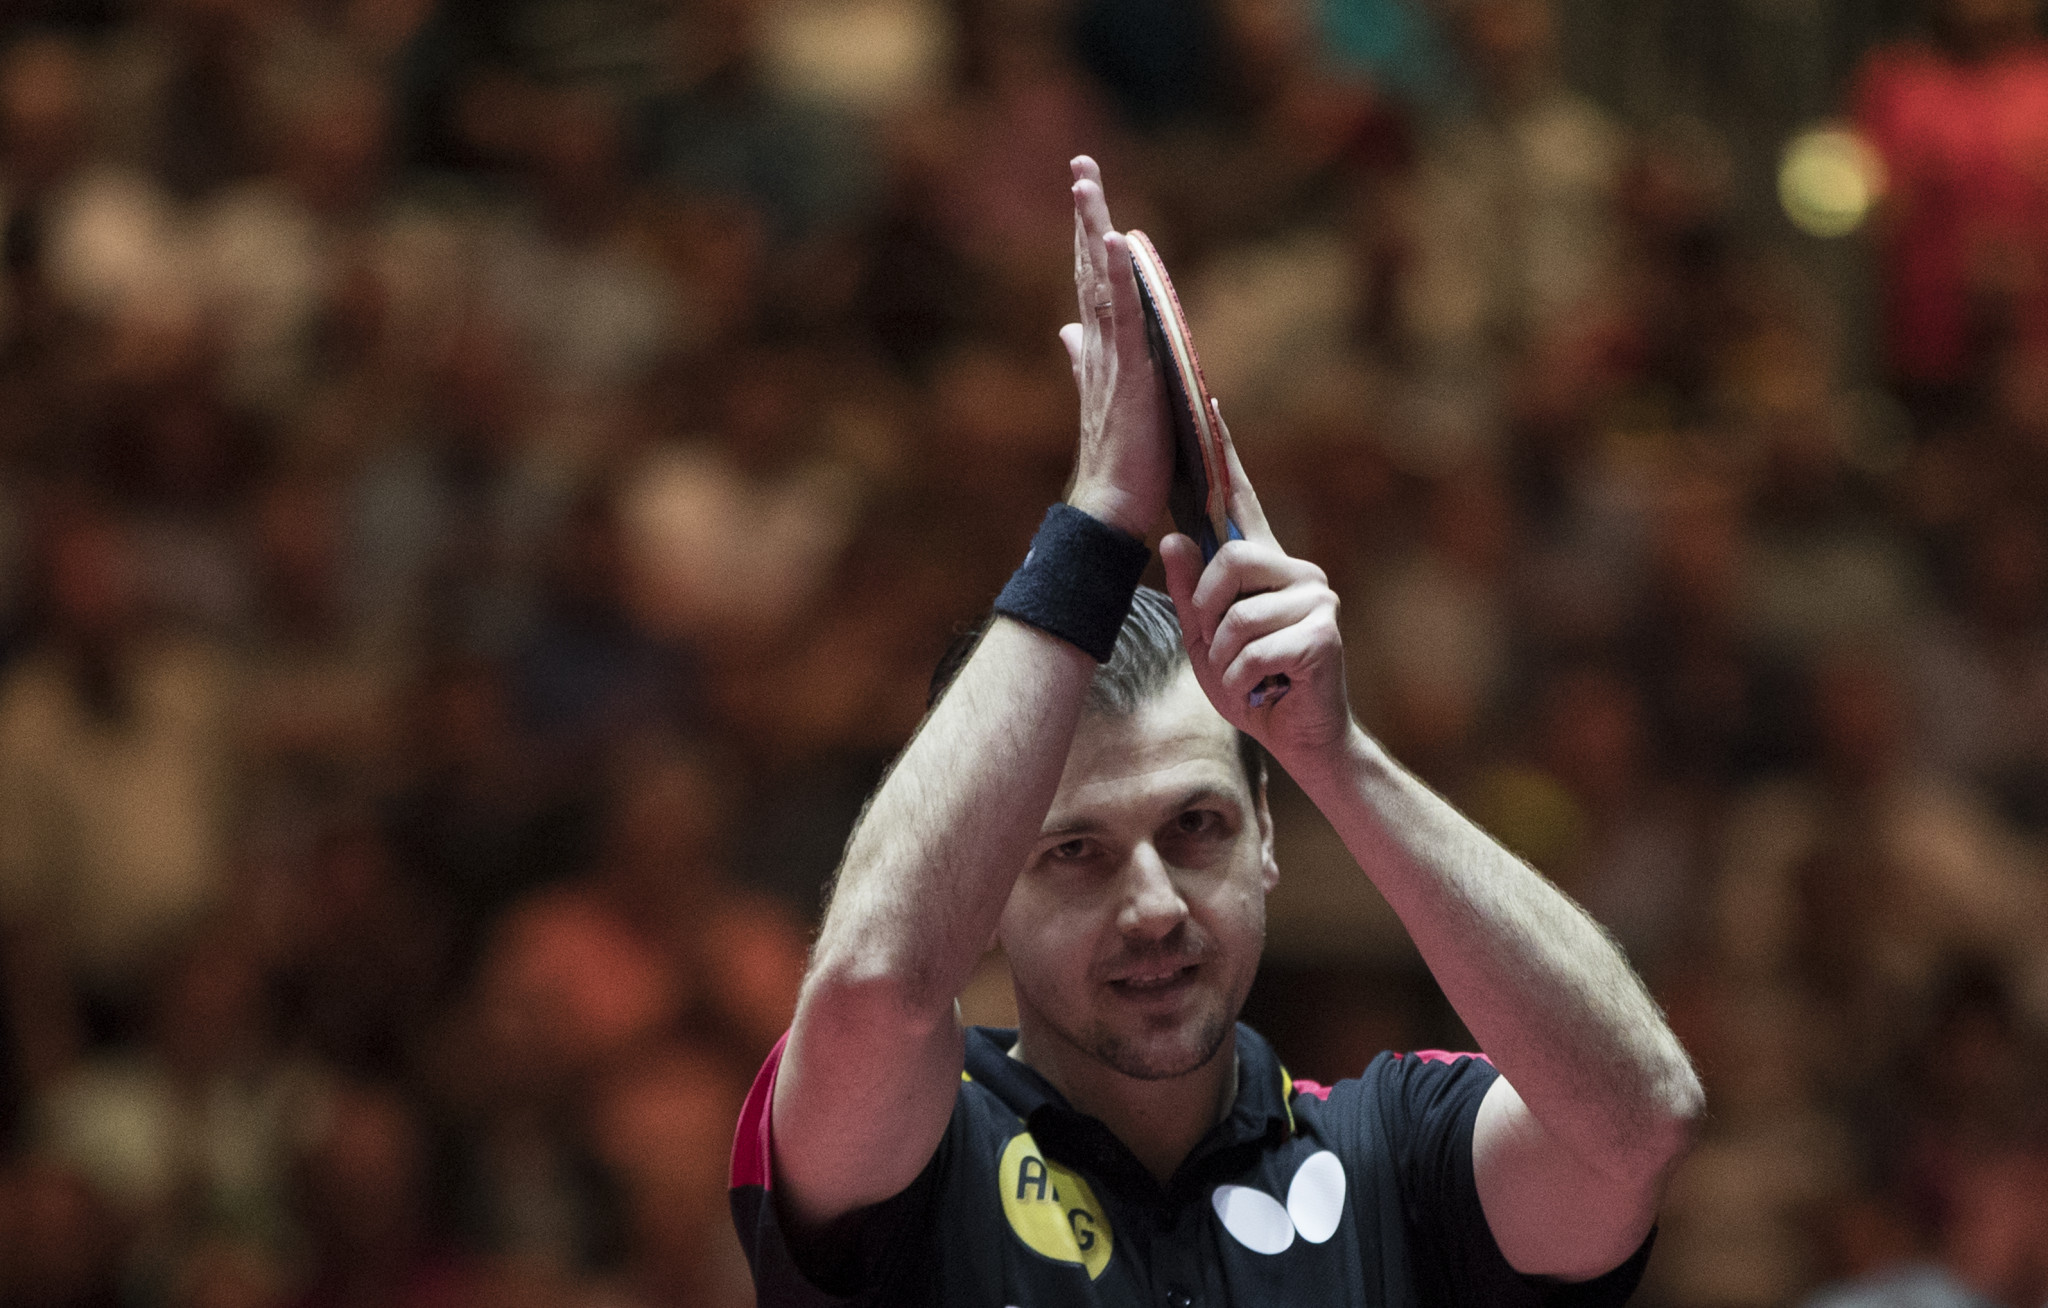 Timo Boll continued his run at his home tournament ©Getty Images